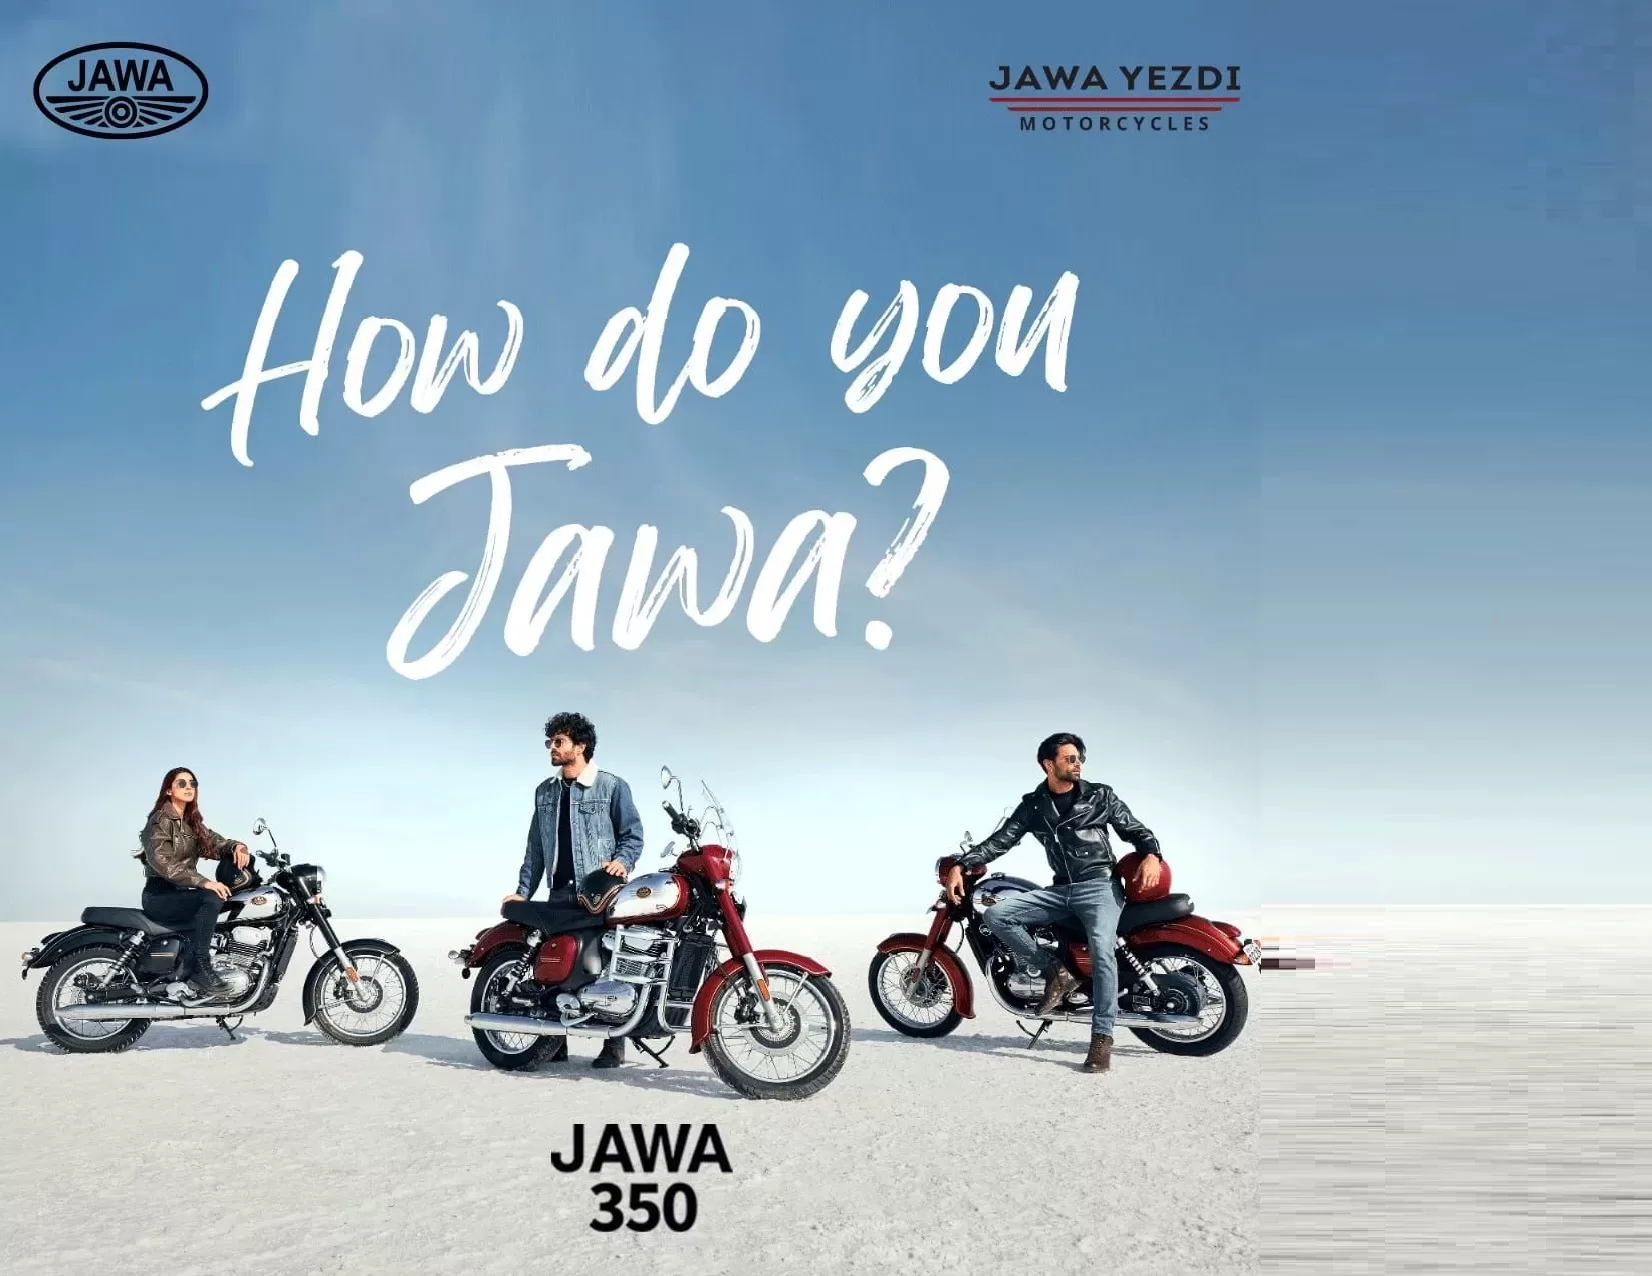 New Jawa 350 Arrives in Mystique Orange & Blazes a Trail at Rs. 2.14 Lakh